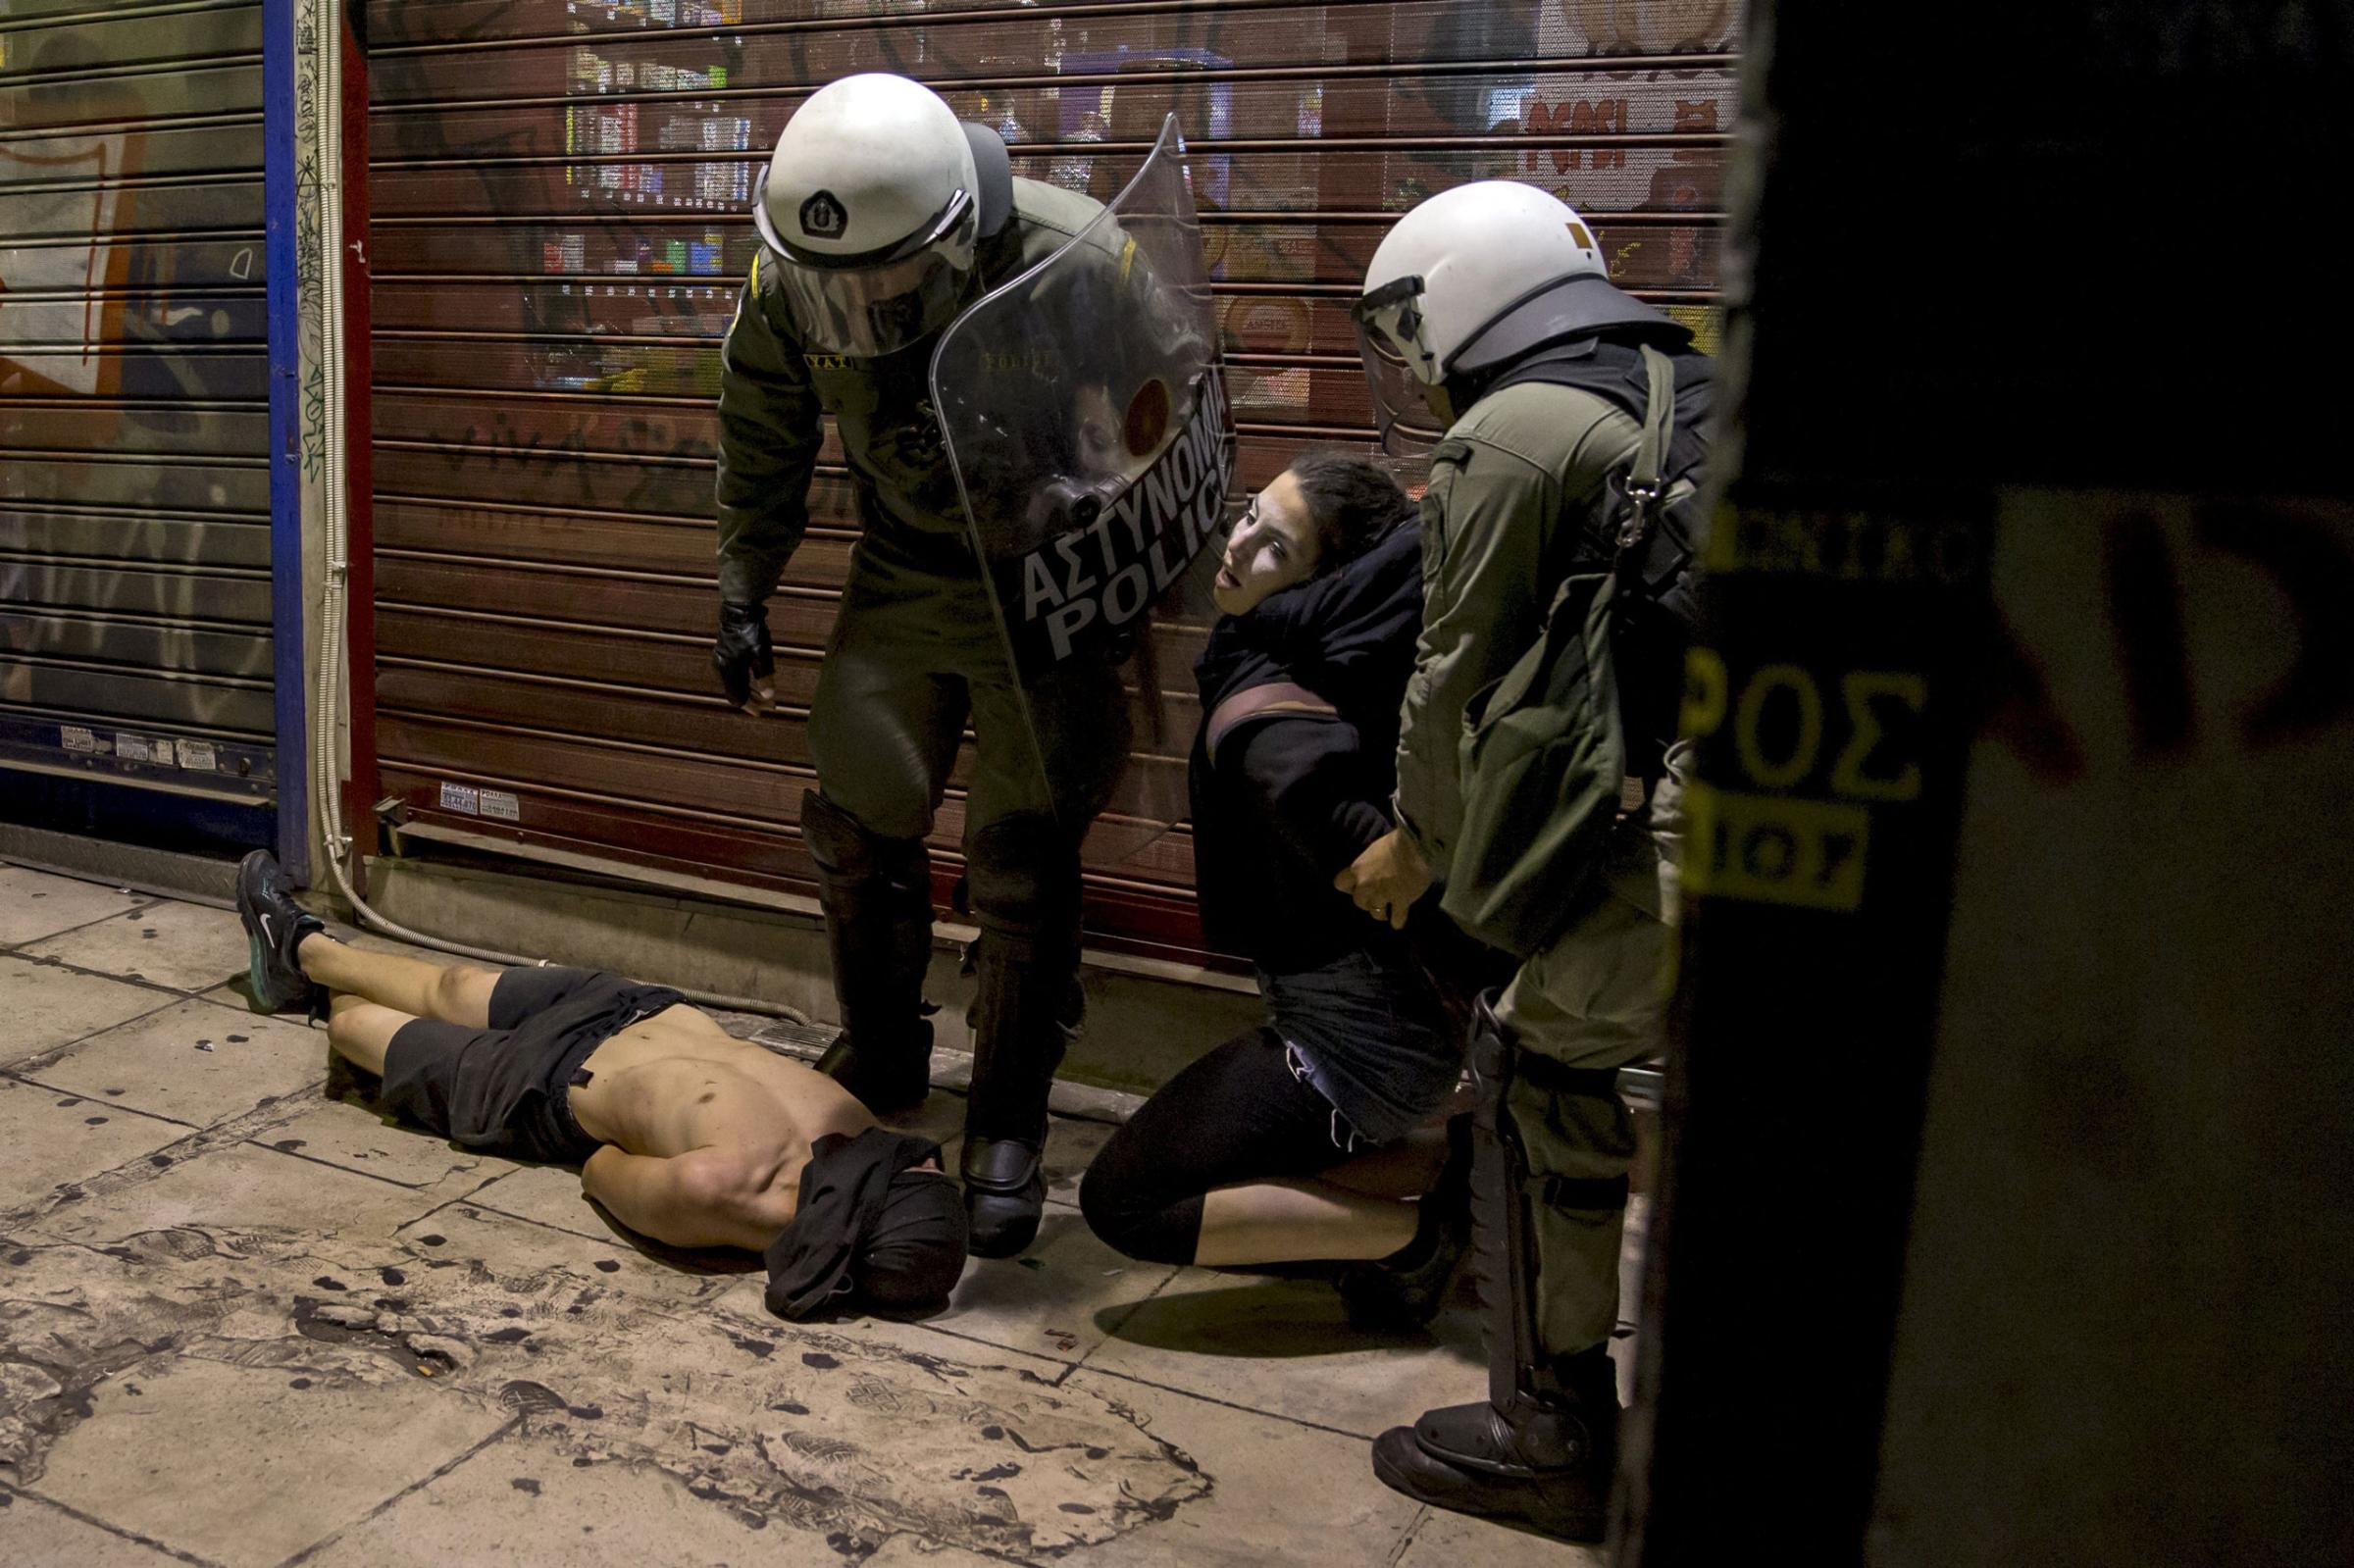 Riot police detain masked youth during minor clashes in central Athens, Greece early July 6, 2015.